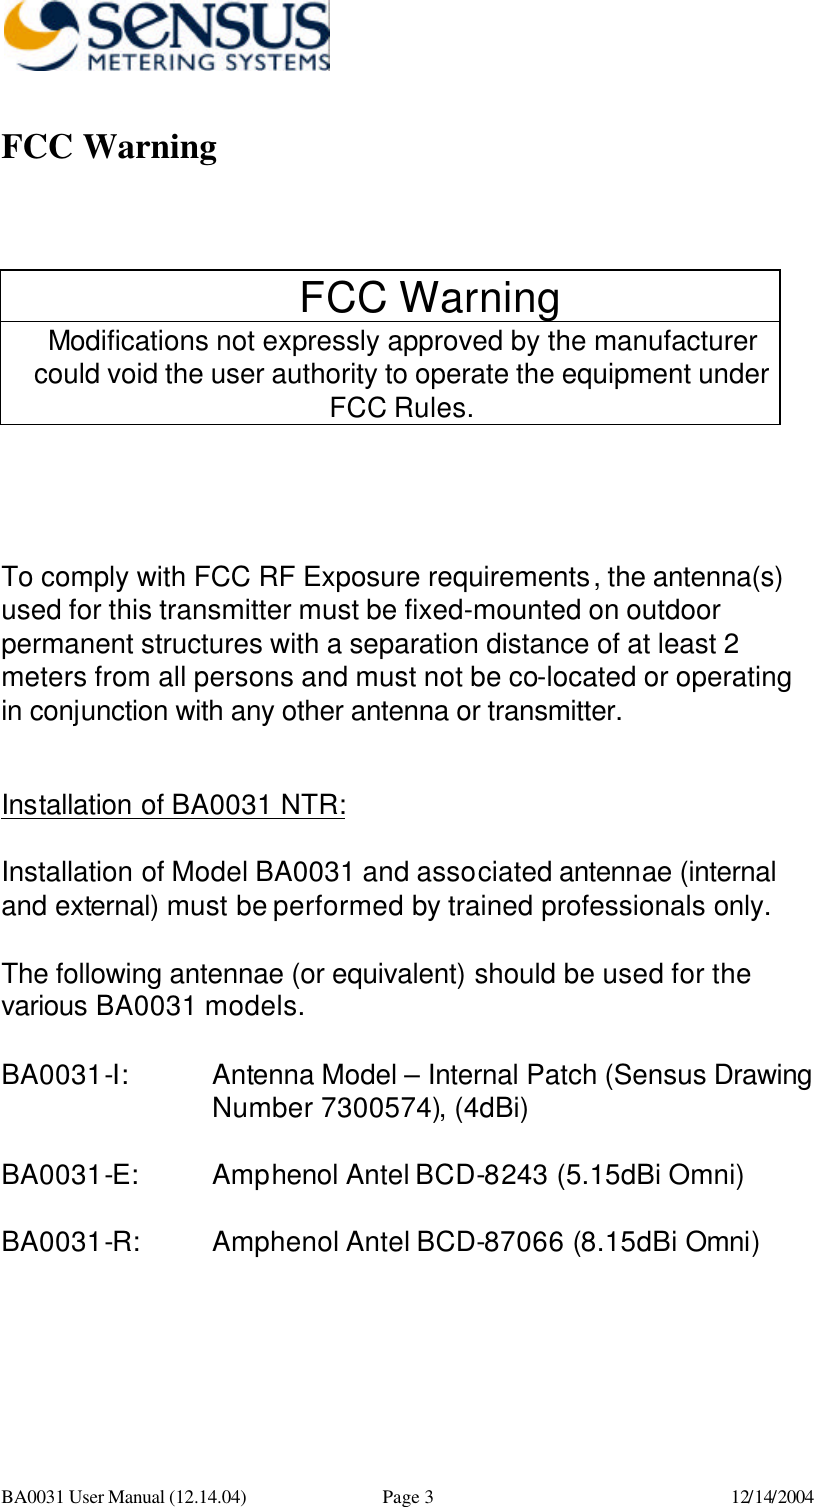      BA0031 User Manual (12.14.04) Page 3 12/14/2004 FCC Warning   FCC Warning Modifications not expressly approved by the manufacturer could void the user authority to operate the equipment under FCC Rules.    To comply with FCC RF Exposure requirements, the antenna(s) used for this transmitter must be fixed-mounted on outdoor permanent structures with a separation distance of at least 2 meters from all persons and must not be co-located or operating in conjunction with any other antenna or transmitter.  Installation of BA0031 NTR:  Installation of Model BA0031 and associated antennae (internal and external) must be performed by trained professionals only.    The following antennae (or equivalent) should be used for the various BA0031 models.  BA0031-I:      Antenna Model – Internal Patch (Sensus Drawing Number 7300574), (4dBi)   BA0031-E:   Amphenol Antel BCD-8243 (5.15dBi Omni)  BA0031-R: Amphenol Antel BCD-87066 (8.15dBi Omni) 